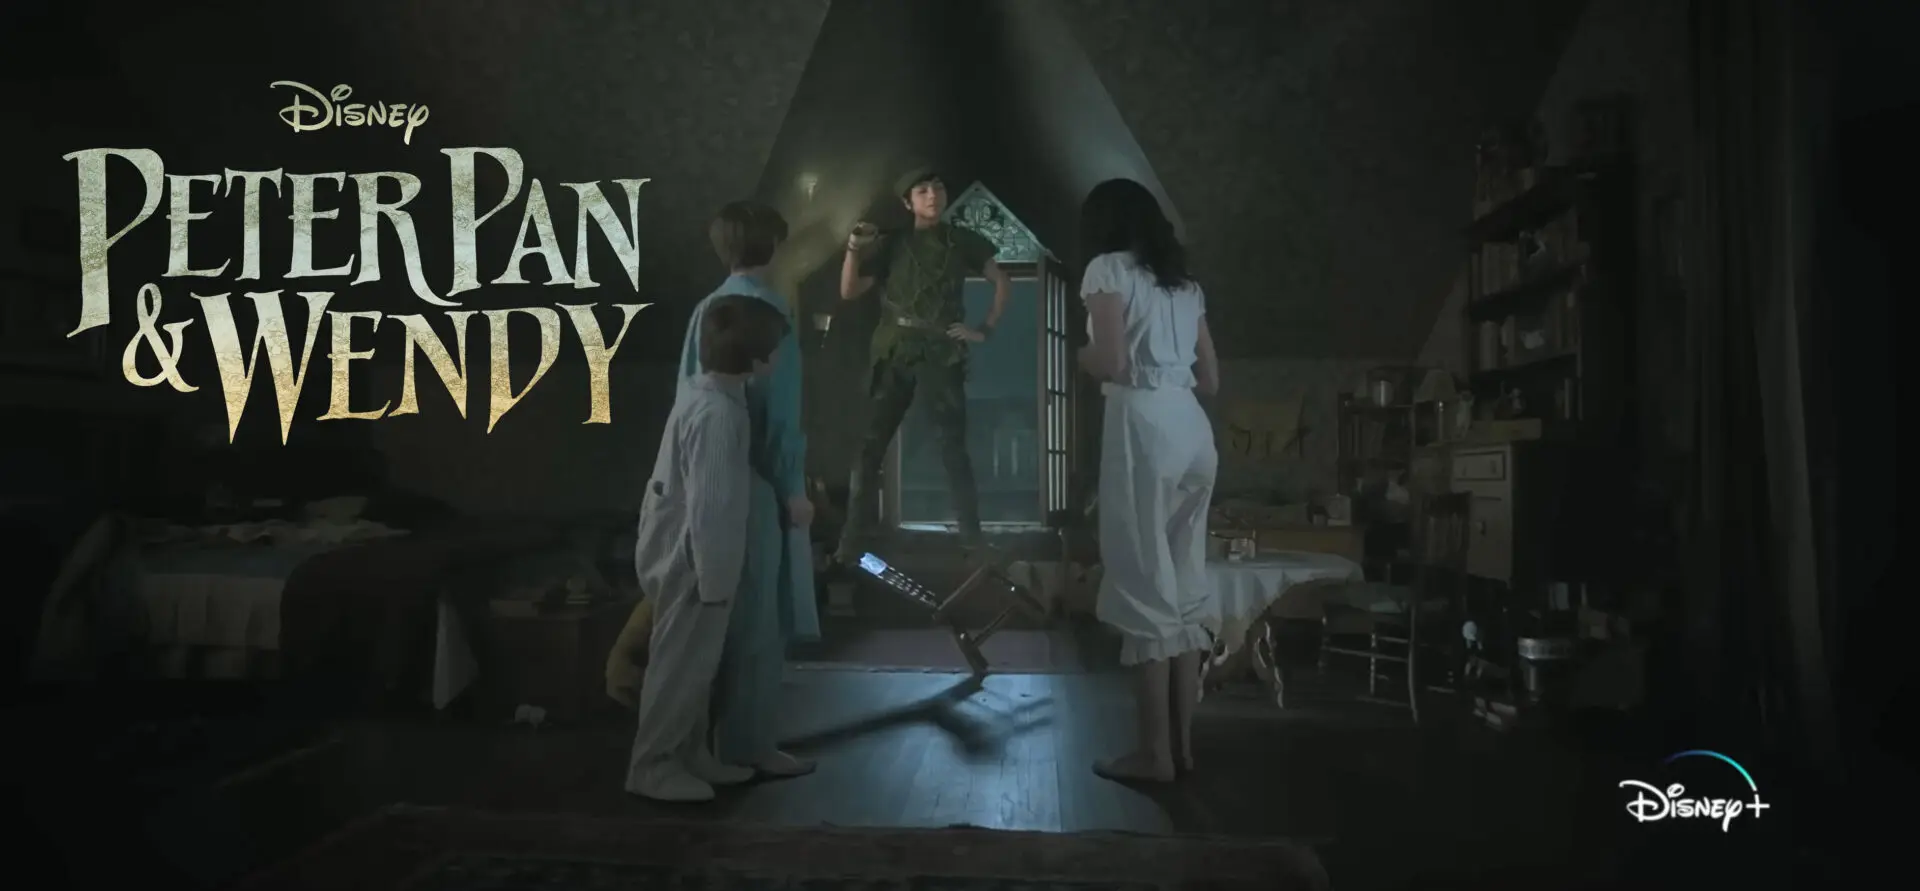 peter pan and wendy theatrical trailer1